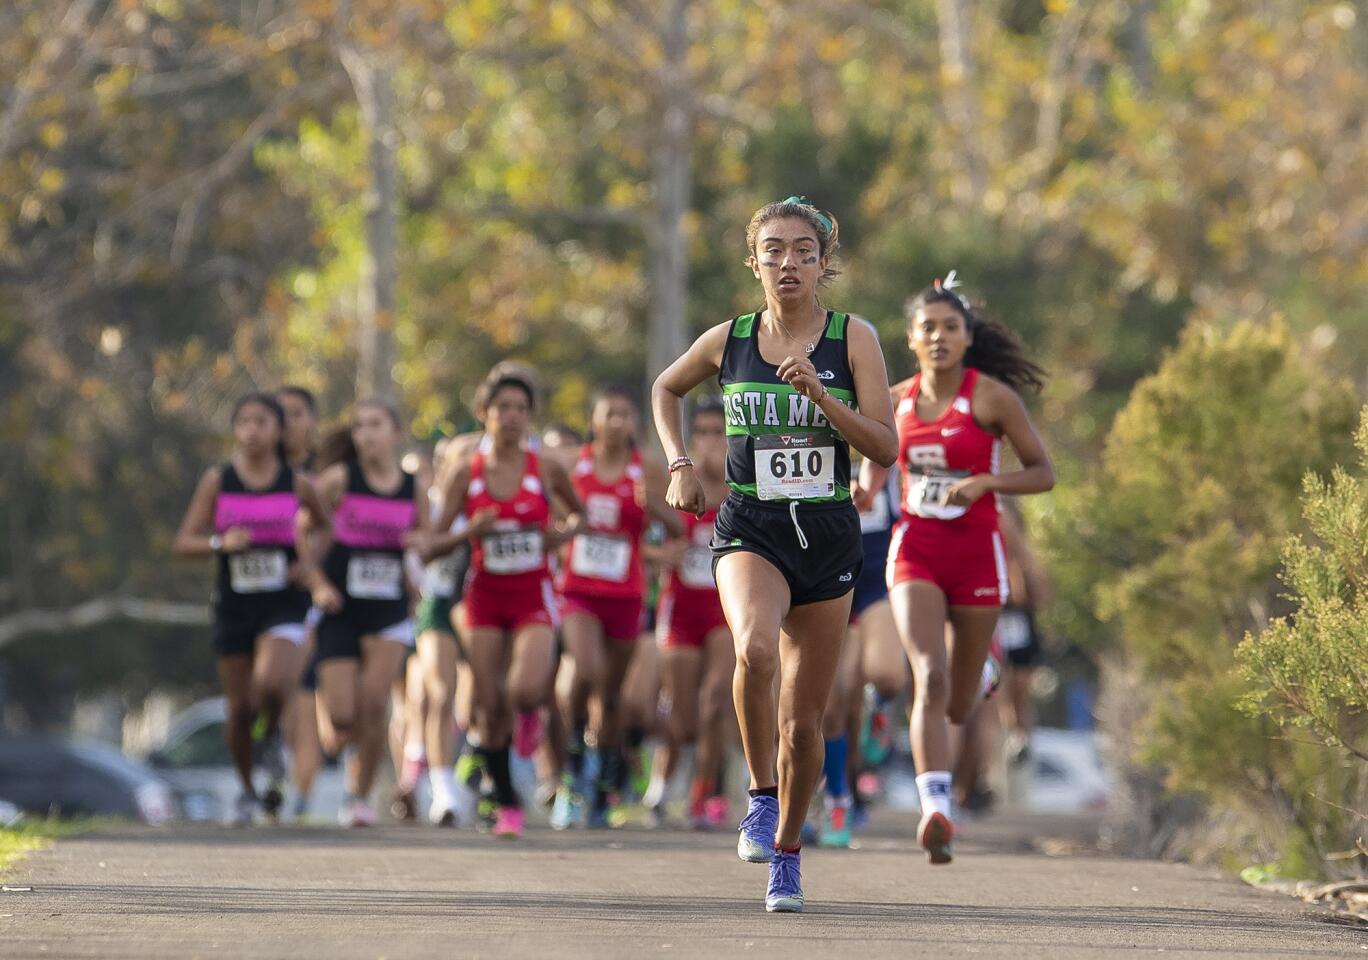 Costa Mesa's Diane Molina leads the pack during the Orange Coast League cross-country finals at Irvine Regional Park in Orange on Monday, October 29.